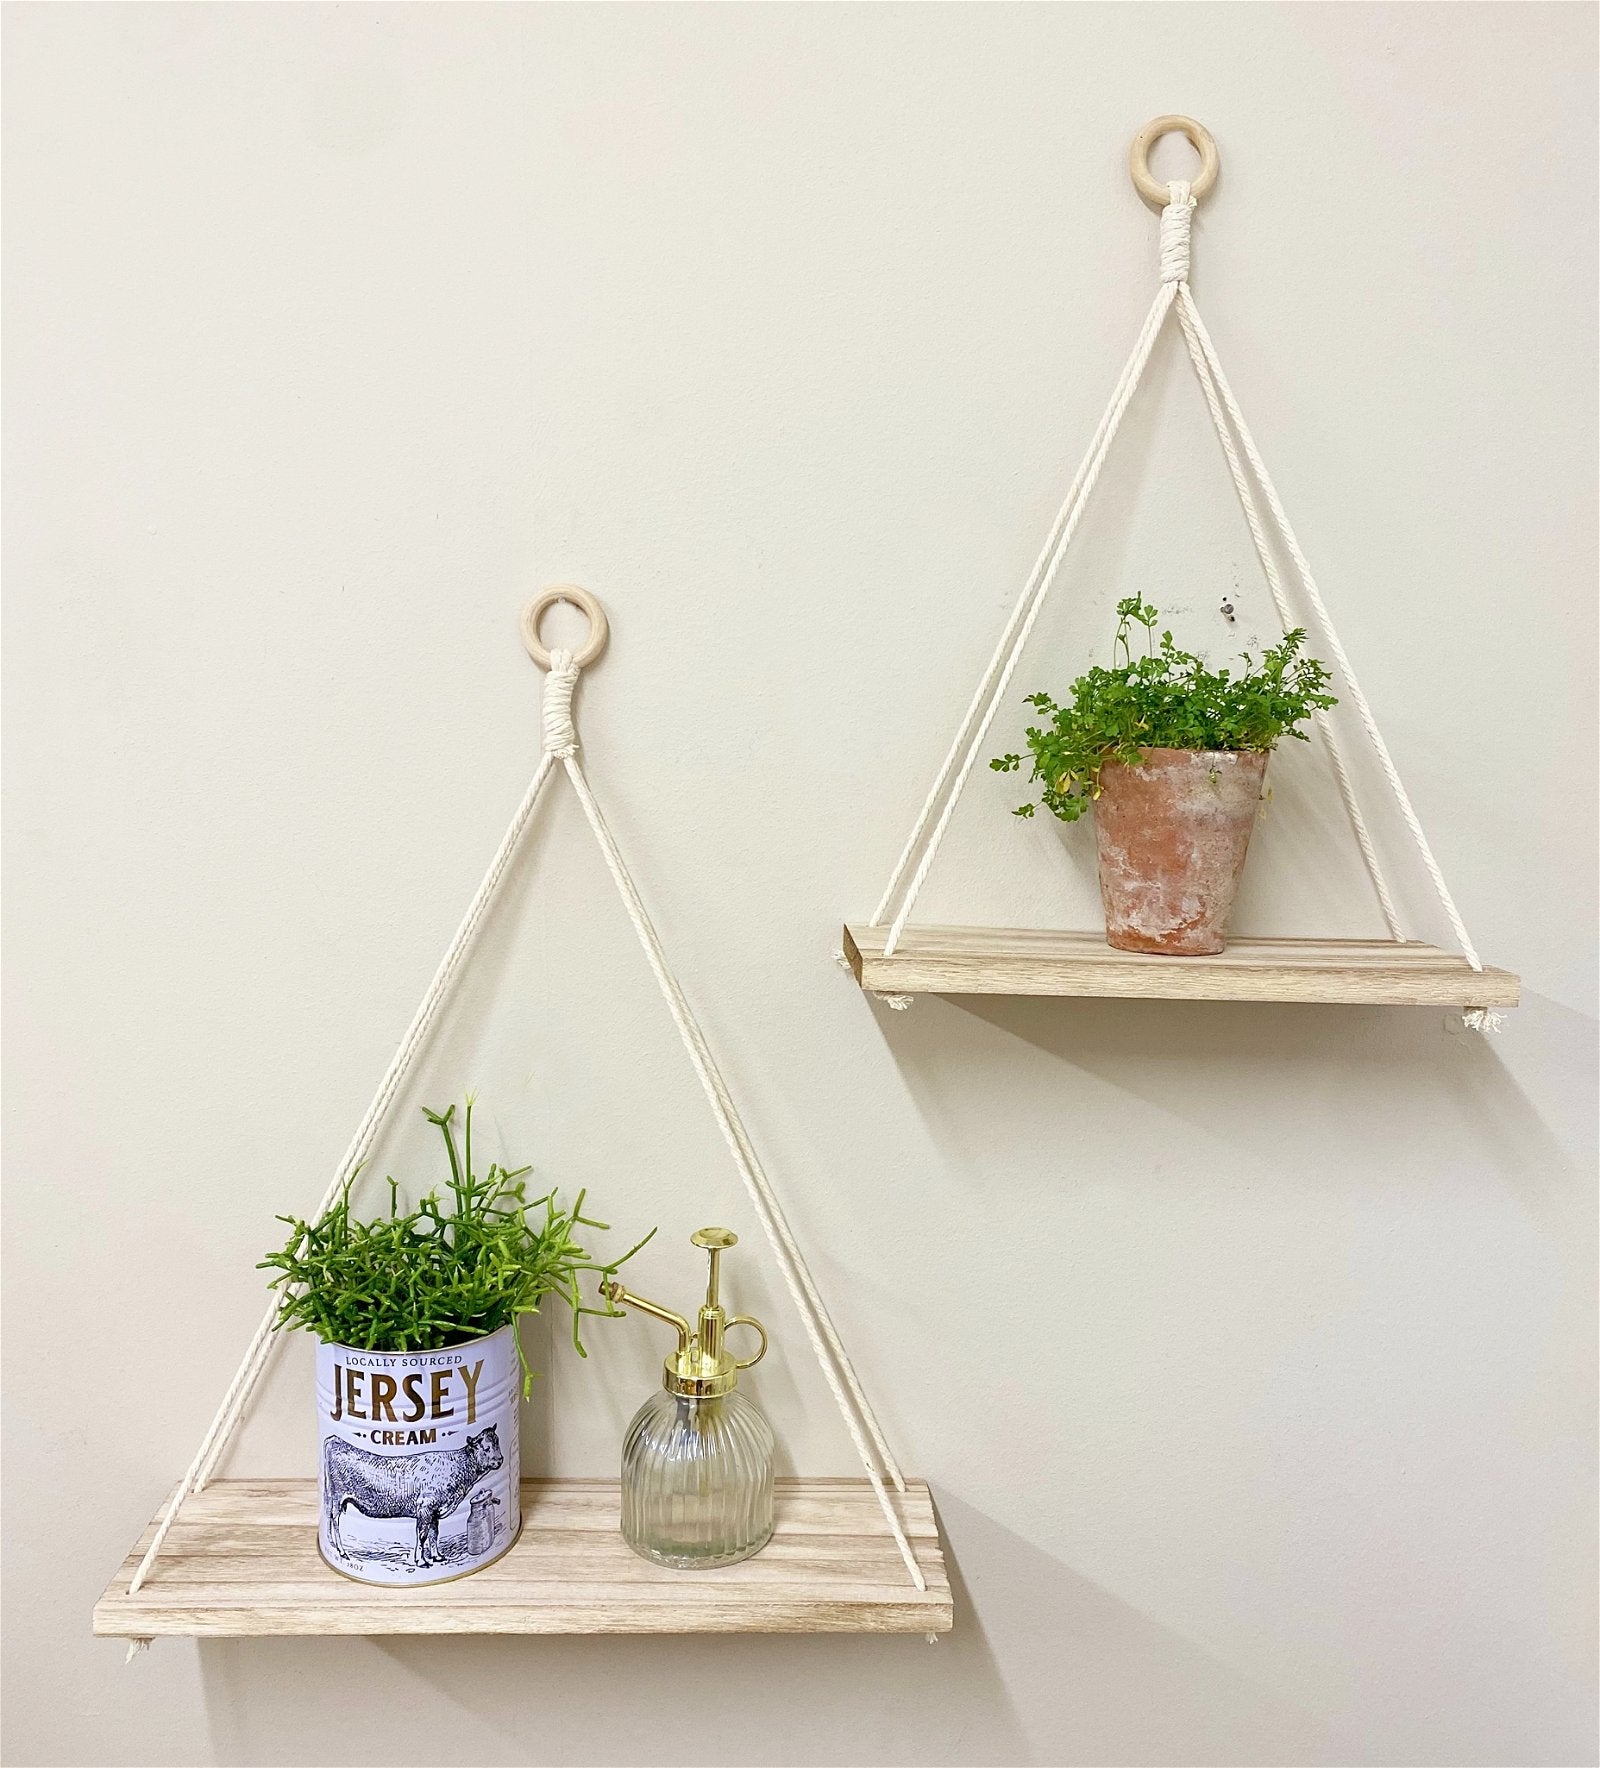 View Set of Two Hanging Wall Shelves information